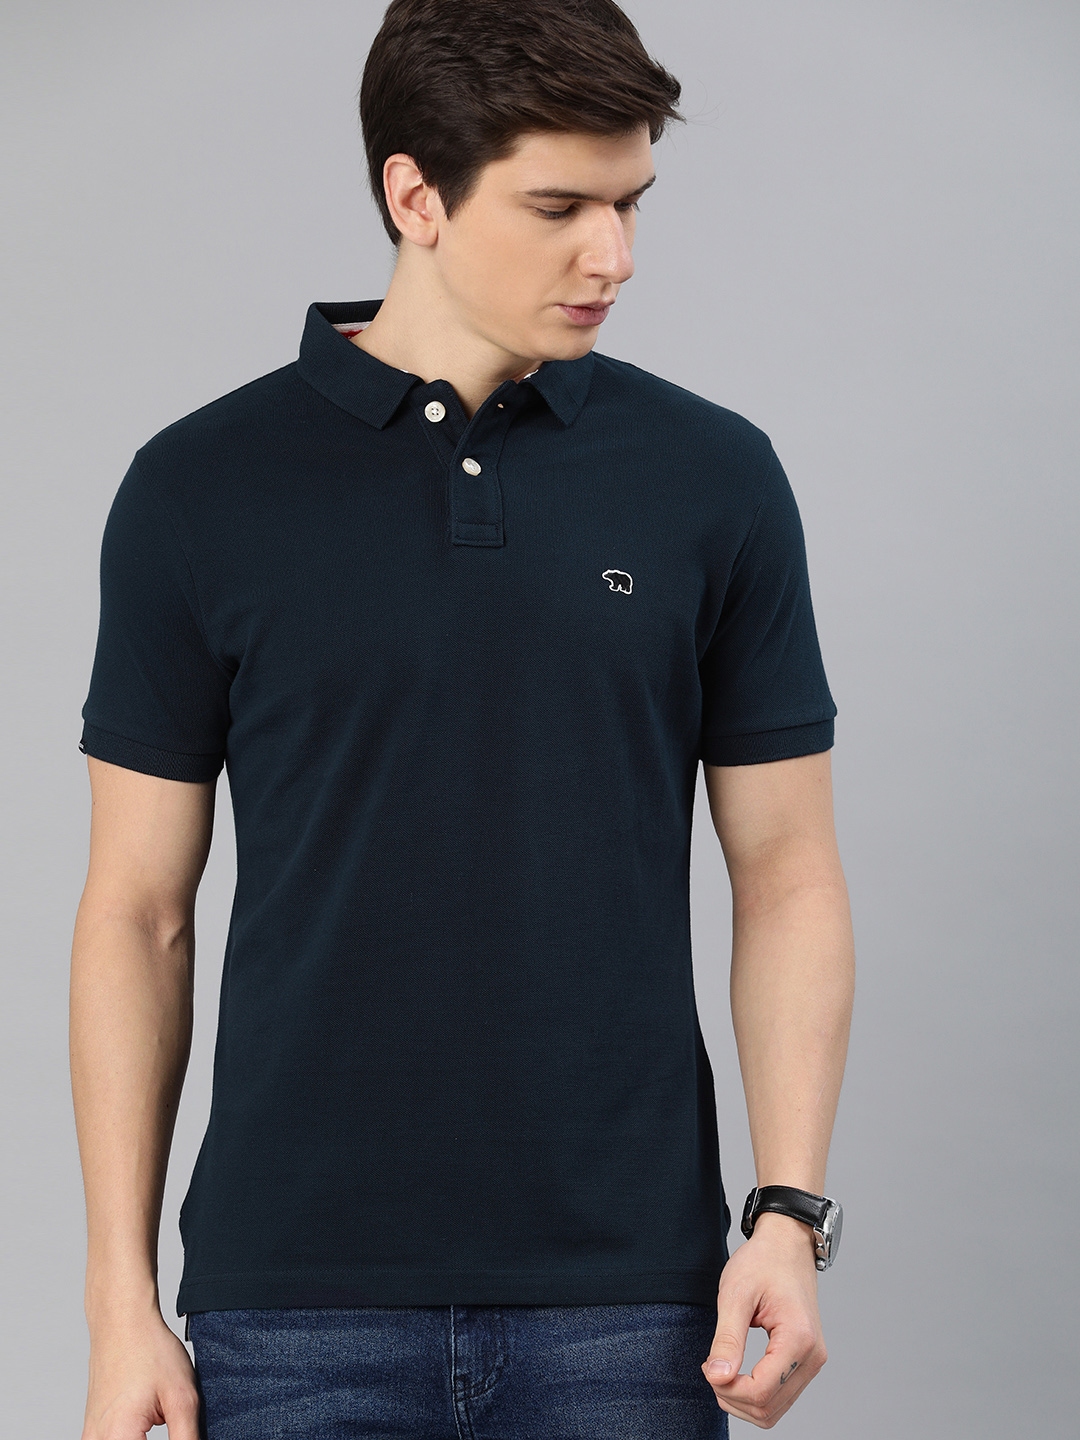 Buy THE BEAR HOUSE Men Navy Blue Solid Slim Fit Polo Collar Pure Cotton ...